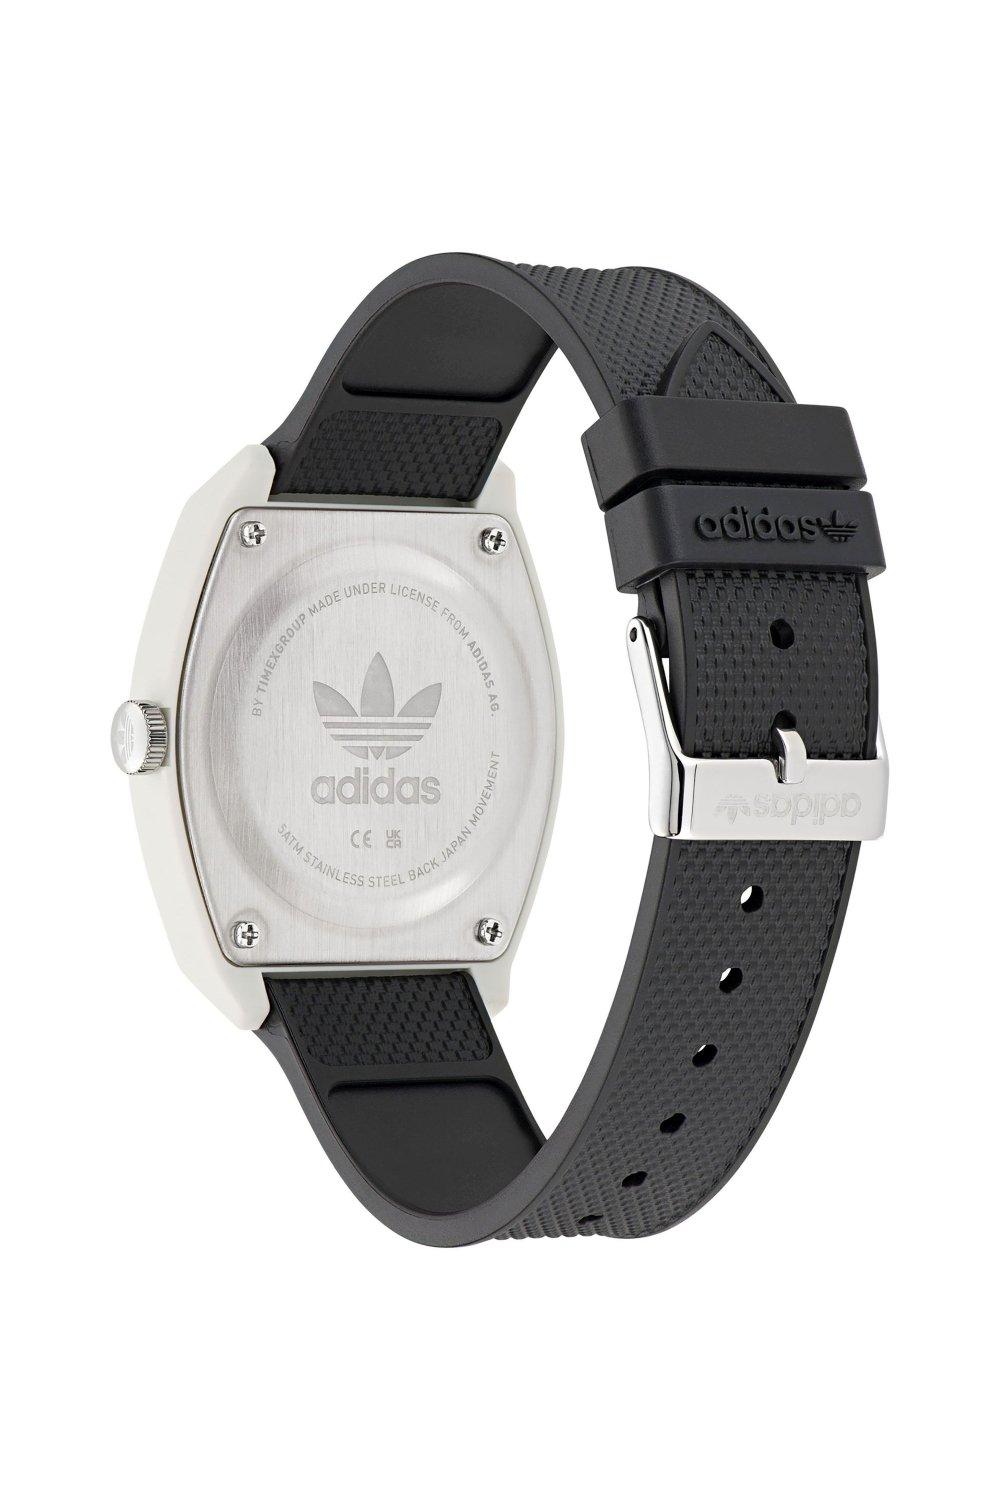 Watches | Project Two Analogue Aost23550 - Watch Originals Fashion Plastic/resin Quartz | adidas